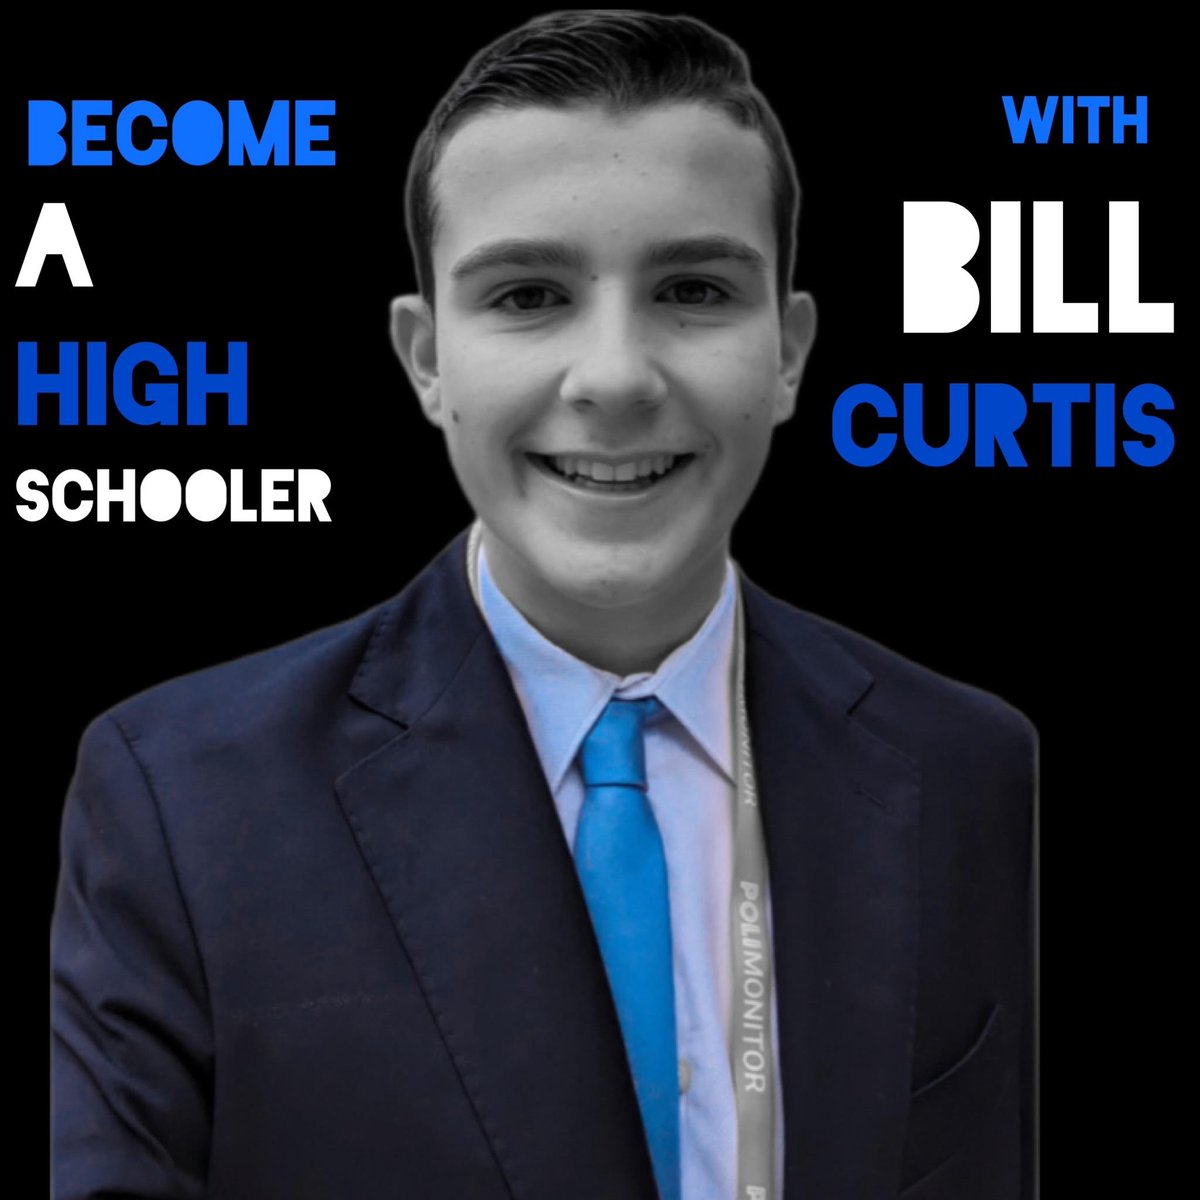 The latest episode of Bill Curtis' podcast 'Become A High Schooler' is now available across a range of podcast sites: - buzzsprout.com/.../14231292-b…... - podbean.com/eas/pb-w2tt3-1… - mixcloud.com/.../become-a-h… - podcasts.apple.com/.../become-a..…... #highschoolpodcast #highschoolpodcaster #highschool